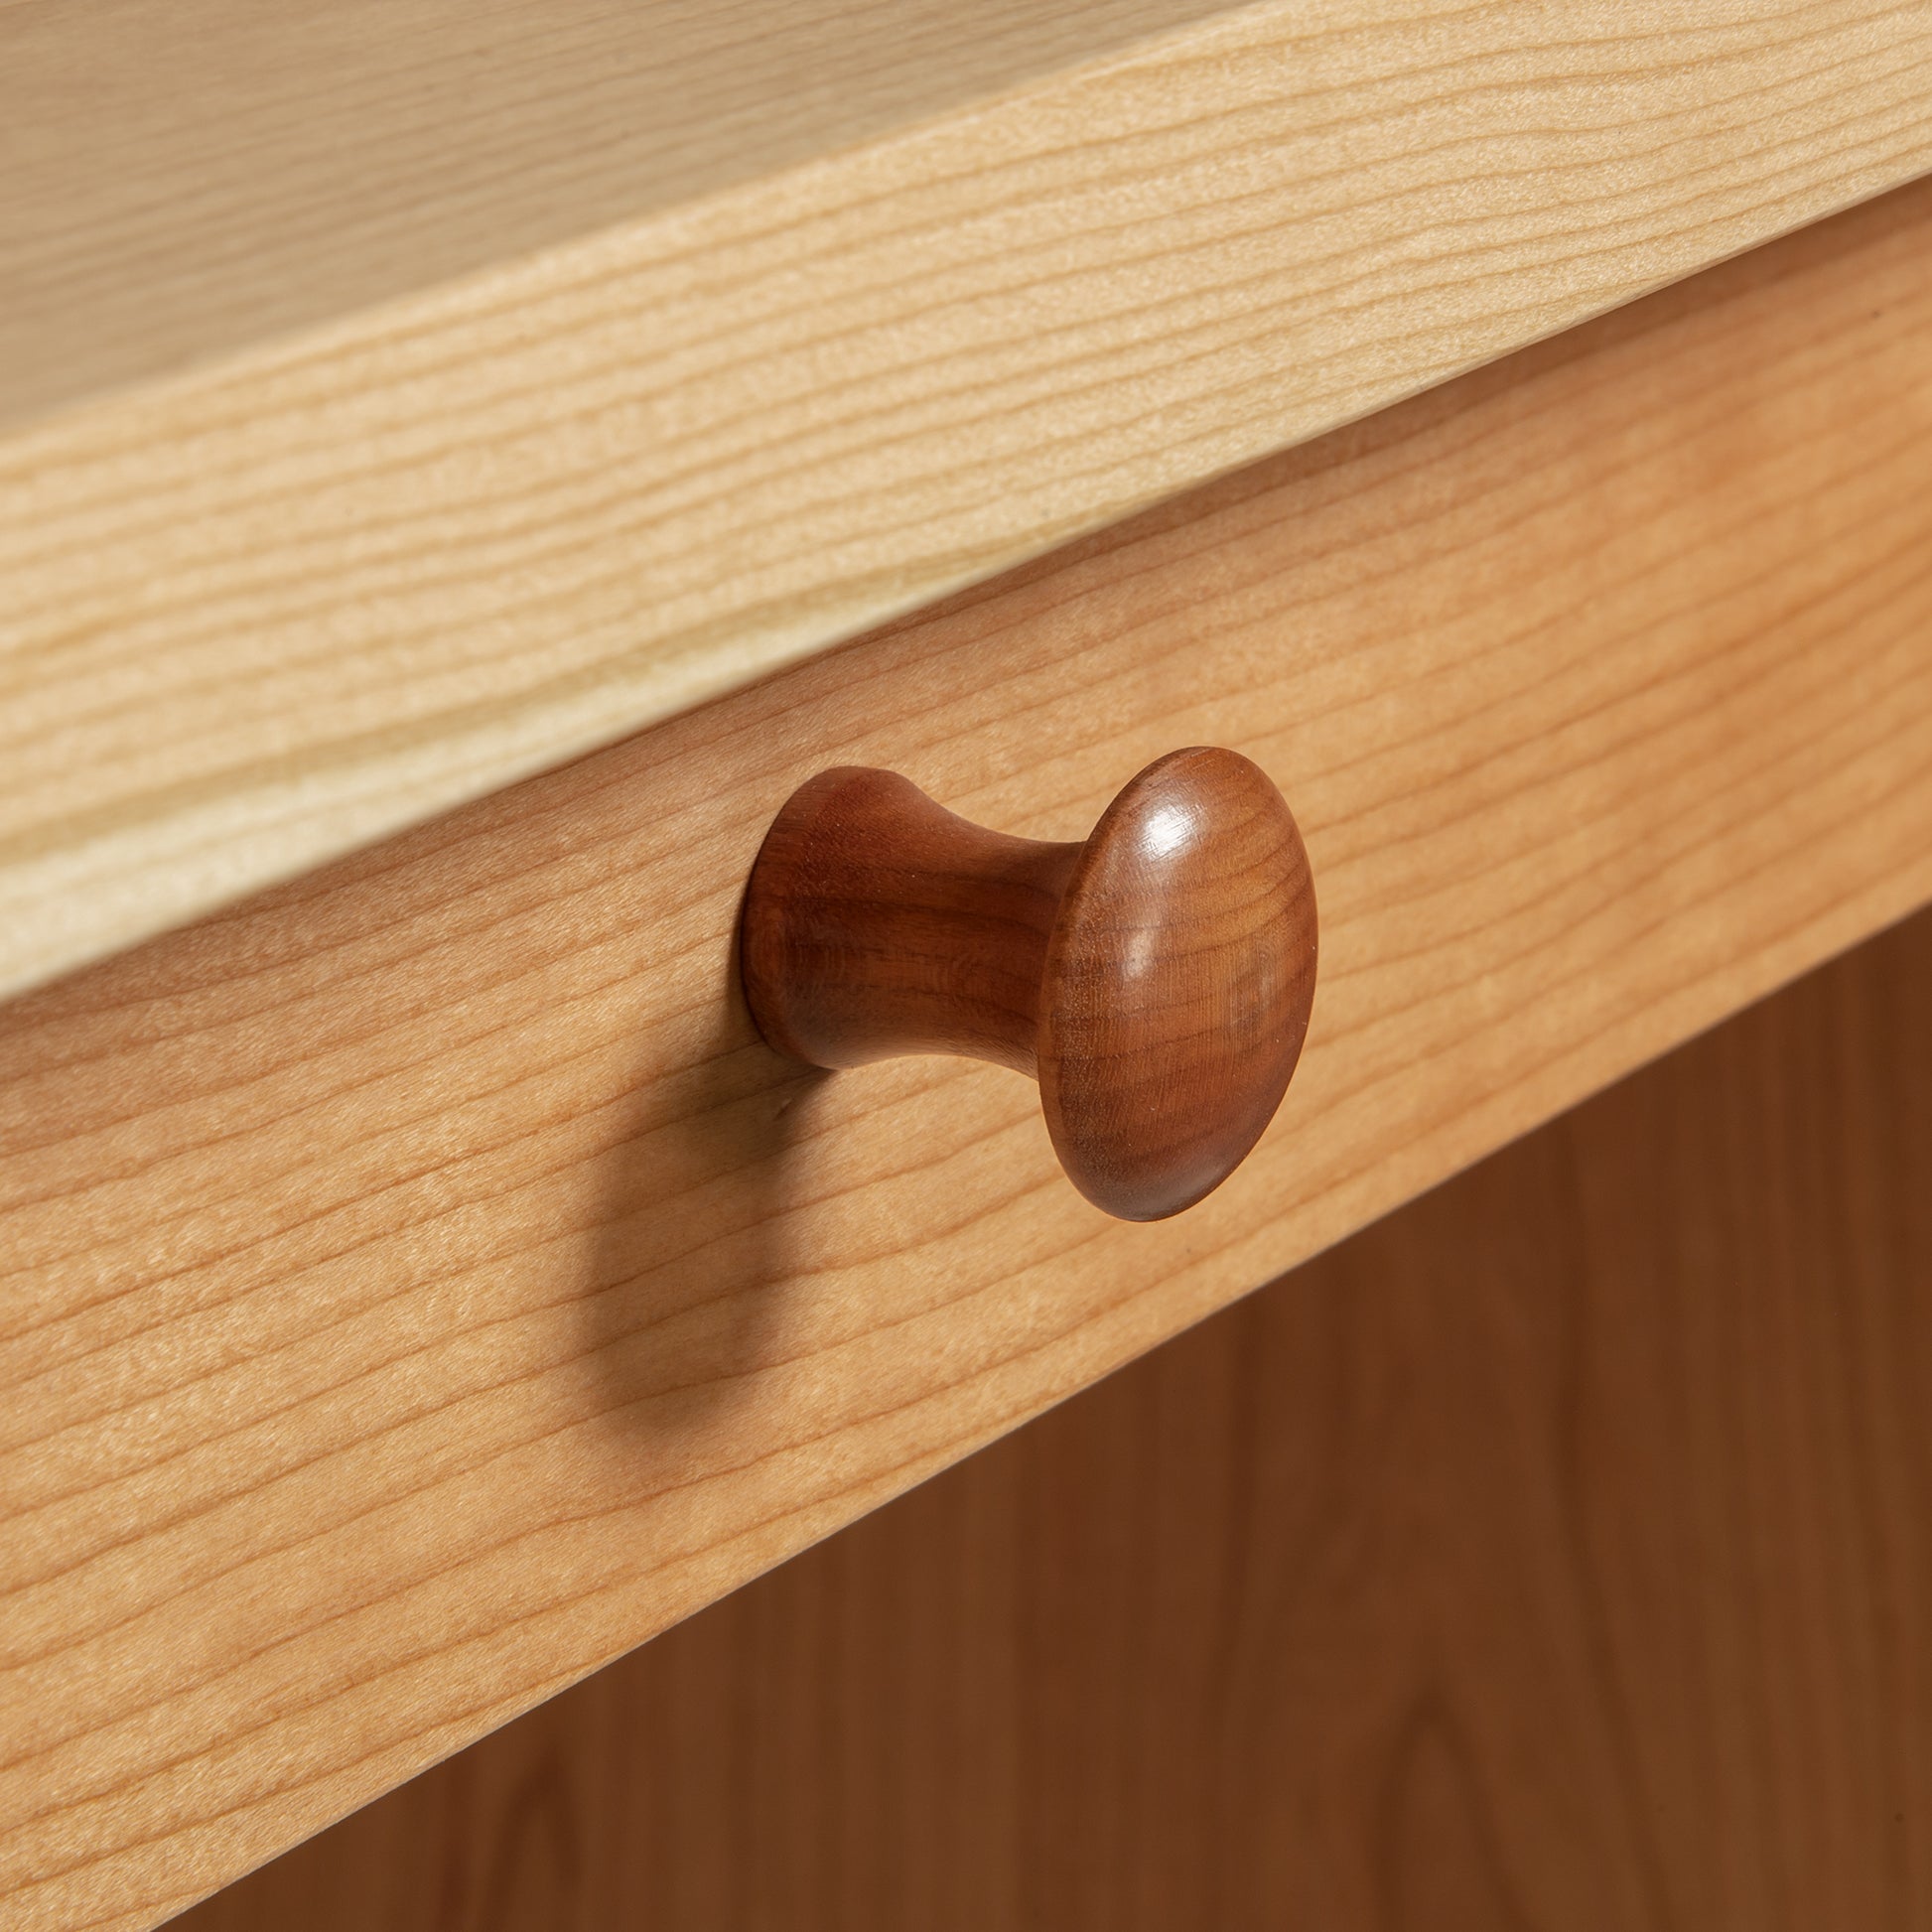 A close up of a solid wood knob on a Lyndon Furniture Small Wood Executive Desk.